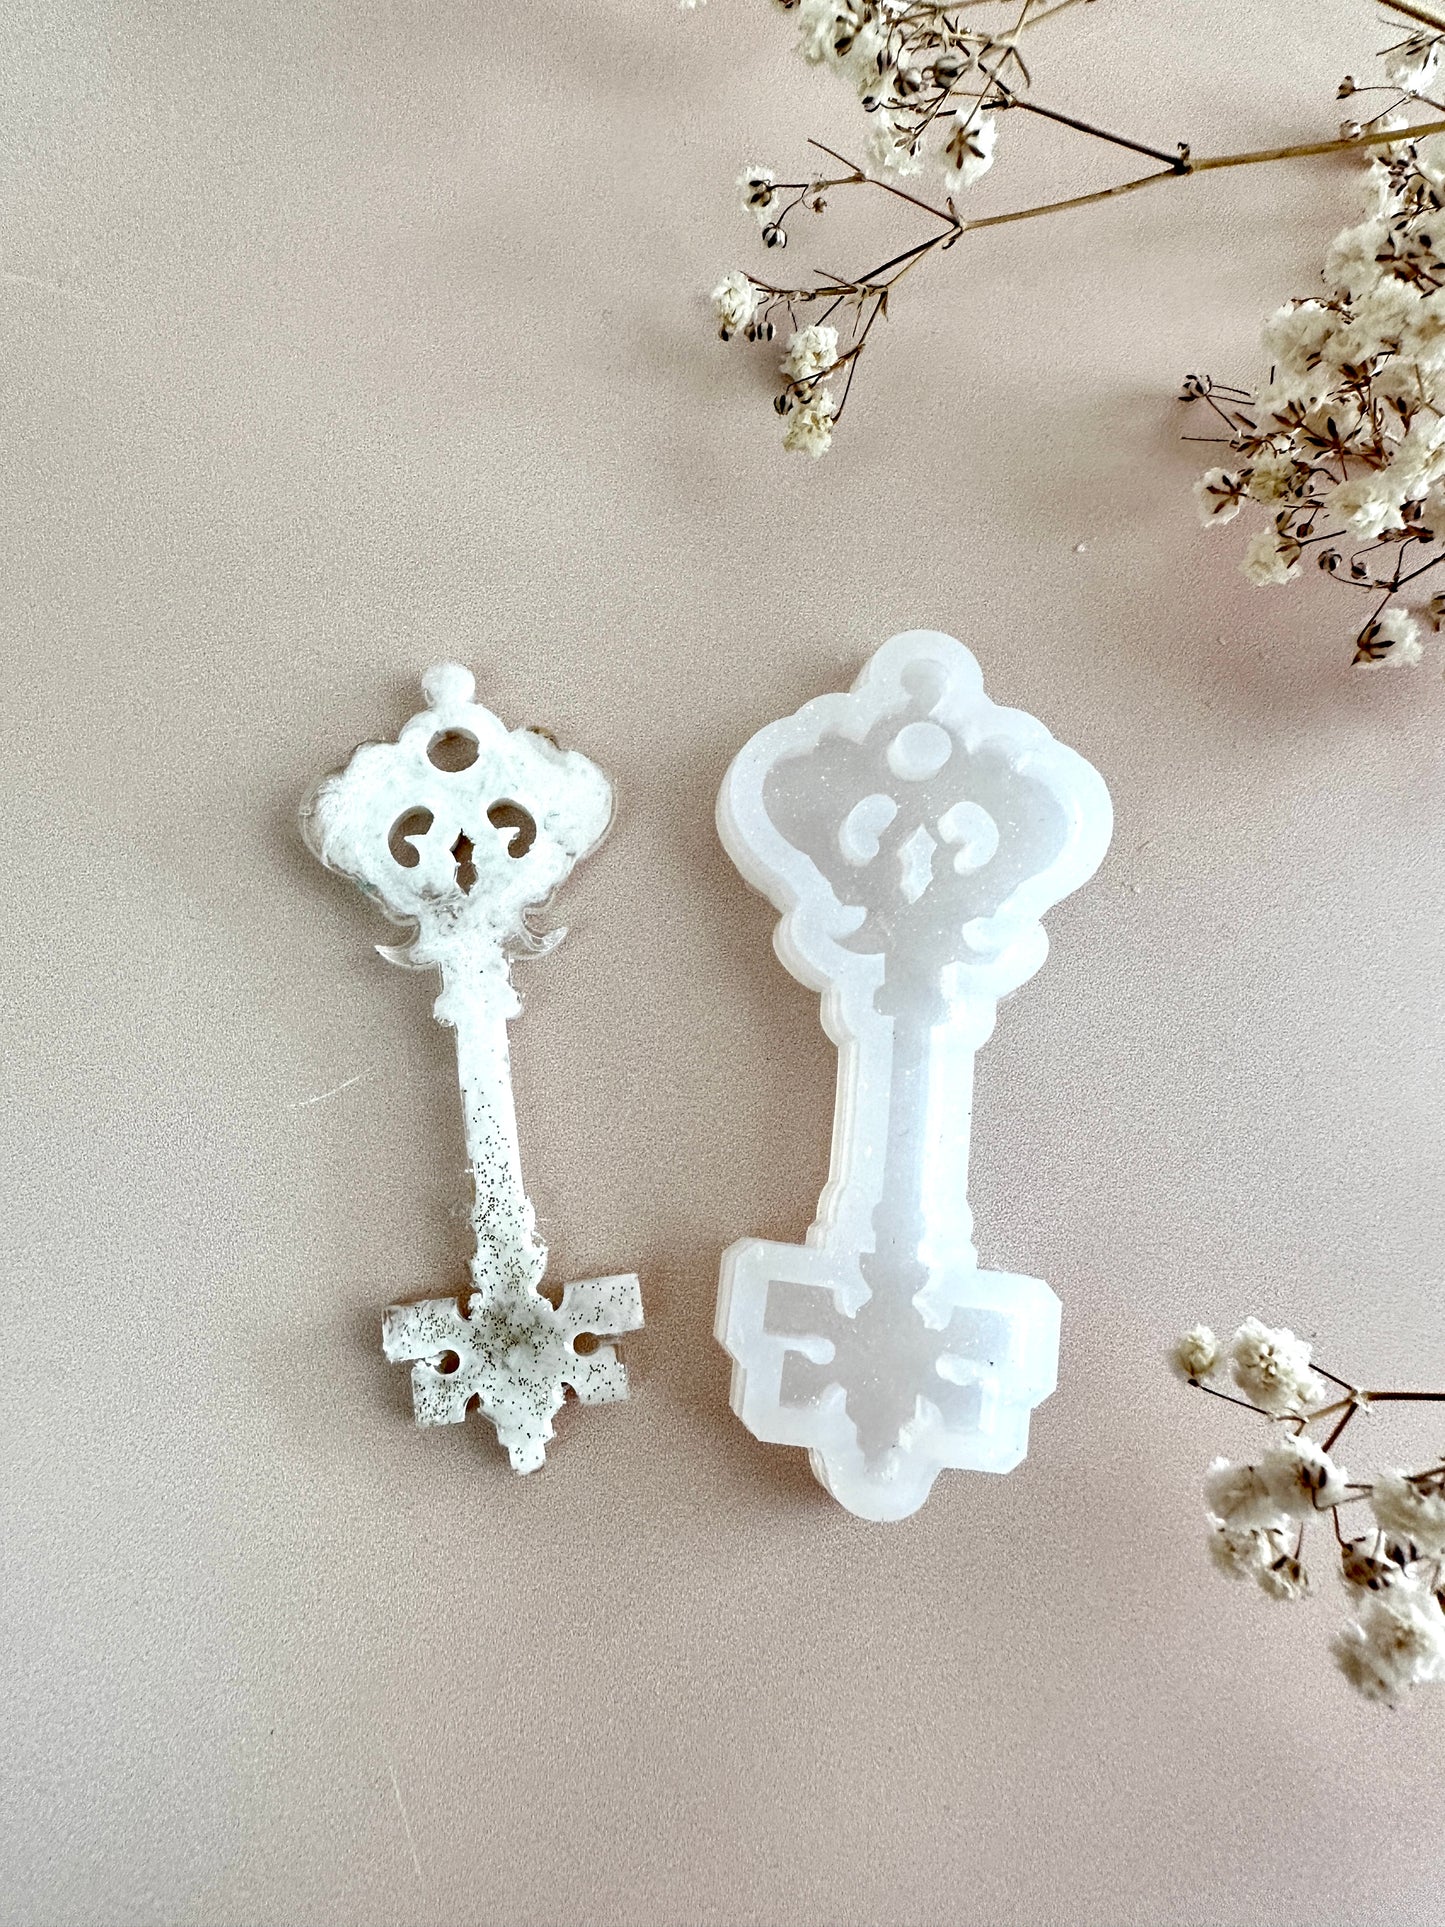 Silicone Mold in the Shape of a Key for Decorating a Christmas Tree